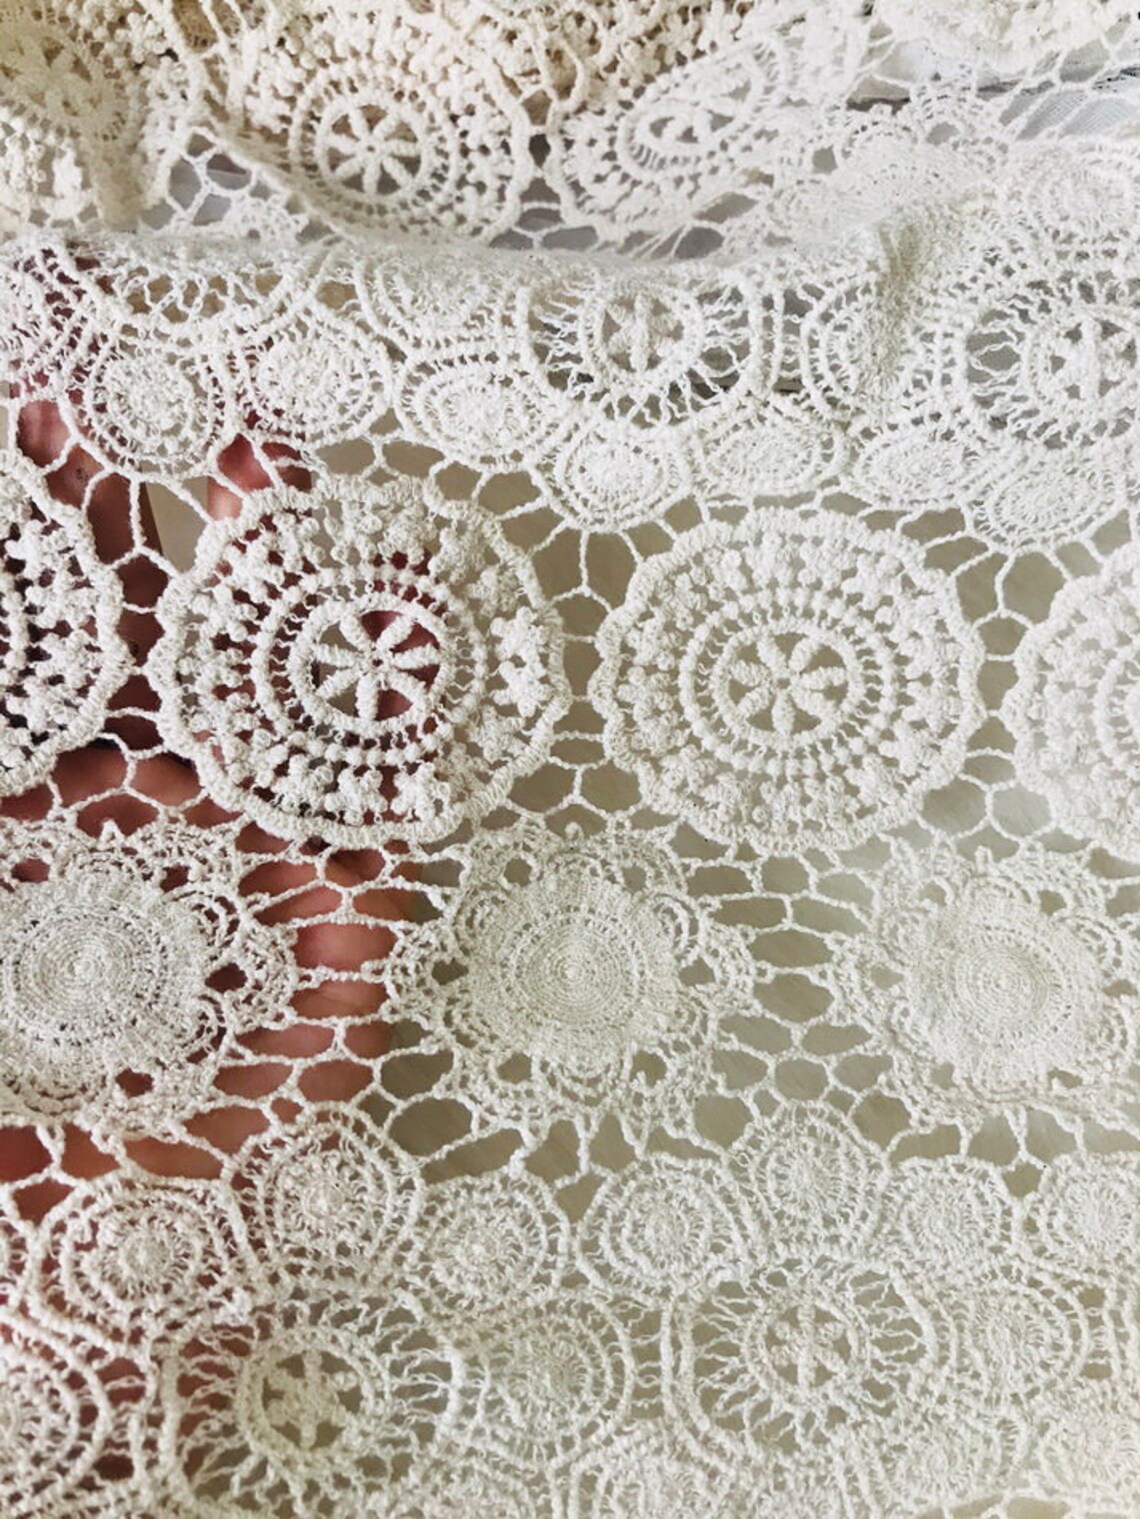 Vintage Beige Cotton Lace Fabric Crochet Style Circle Fabric | Etsy